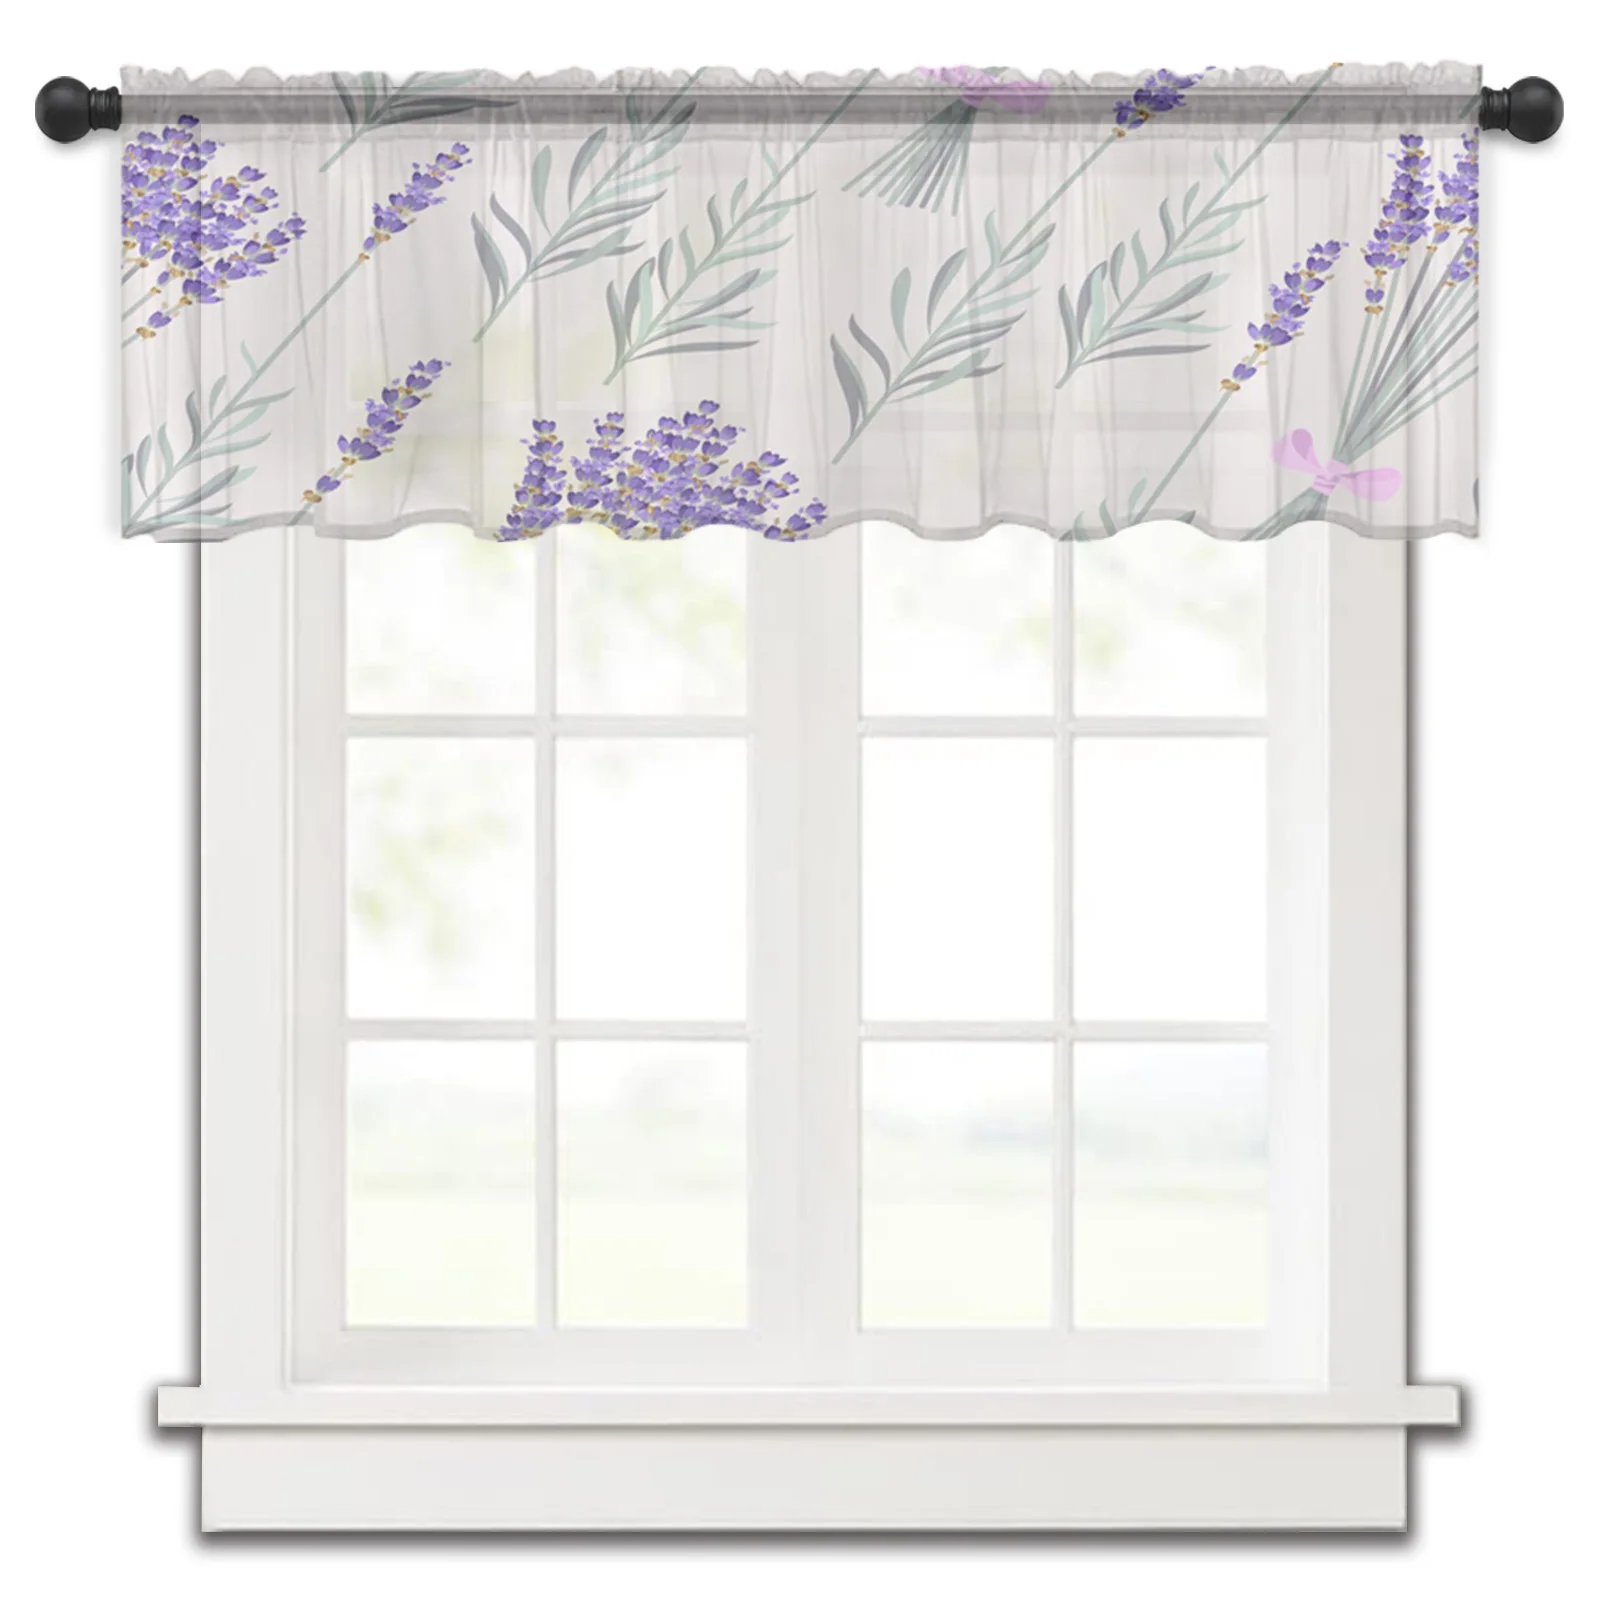 

Lavender Flowers Purple Leaves Kitchen Small Curtain Tulle Sheer Short Curtain Bedroom Living Room Home Decor Voile Drapes